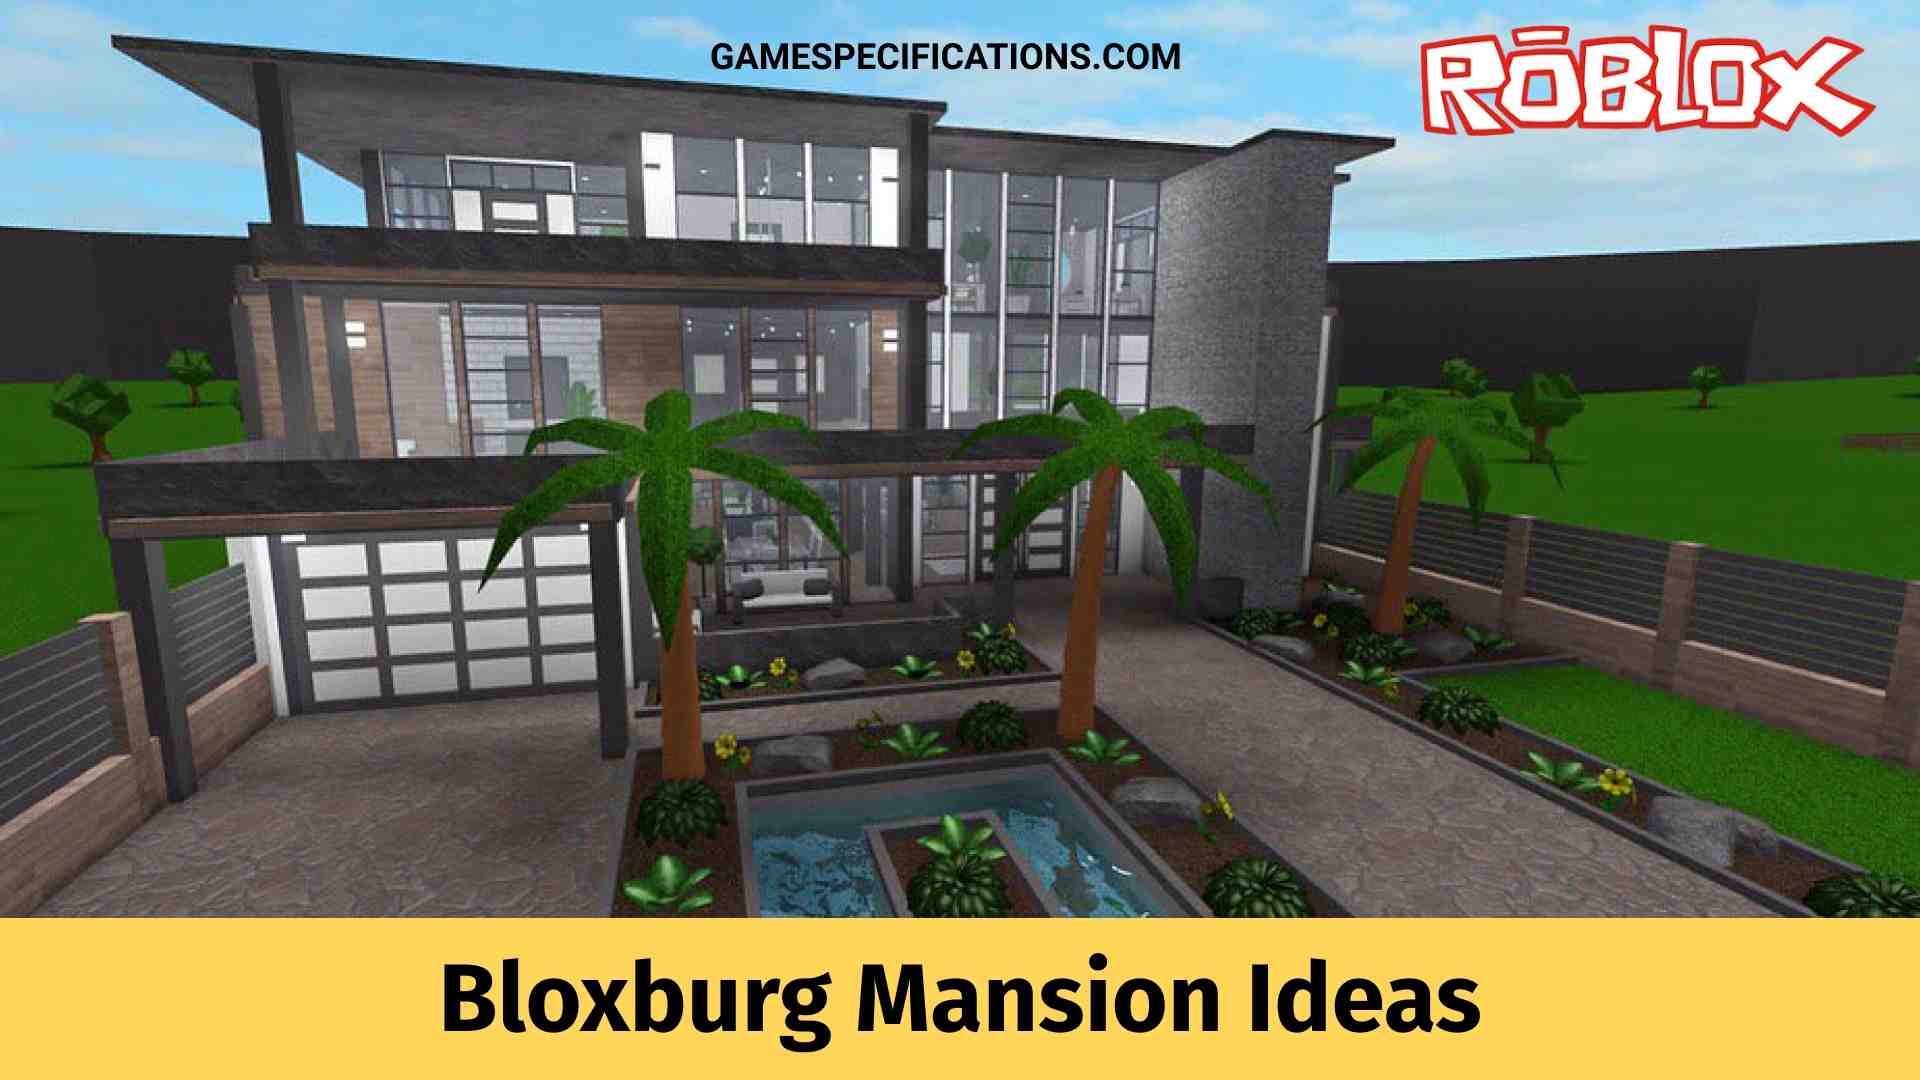 29 Bloxburg Mansion Ideas For Rich Players - Game Specifications